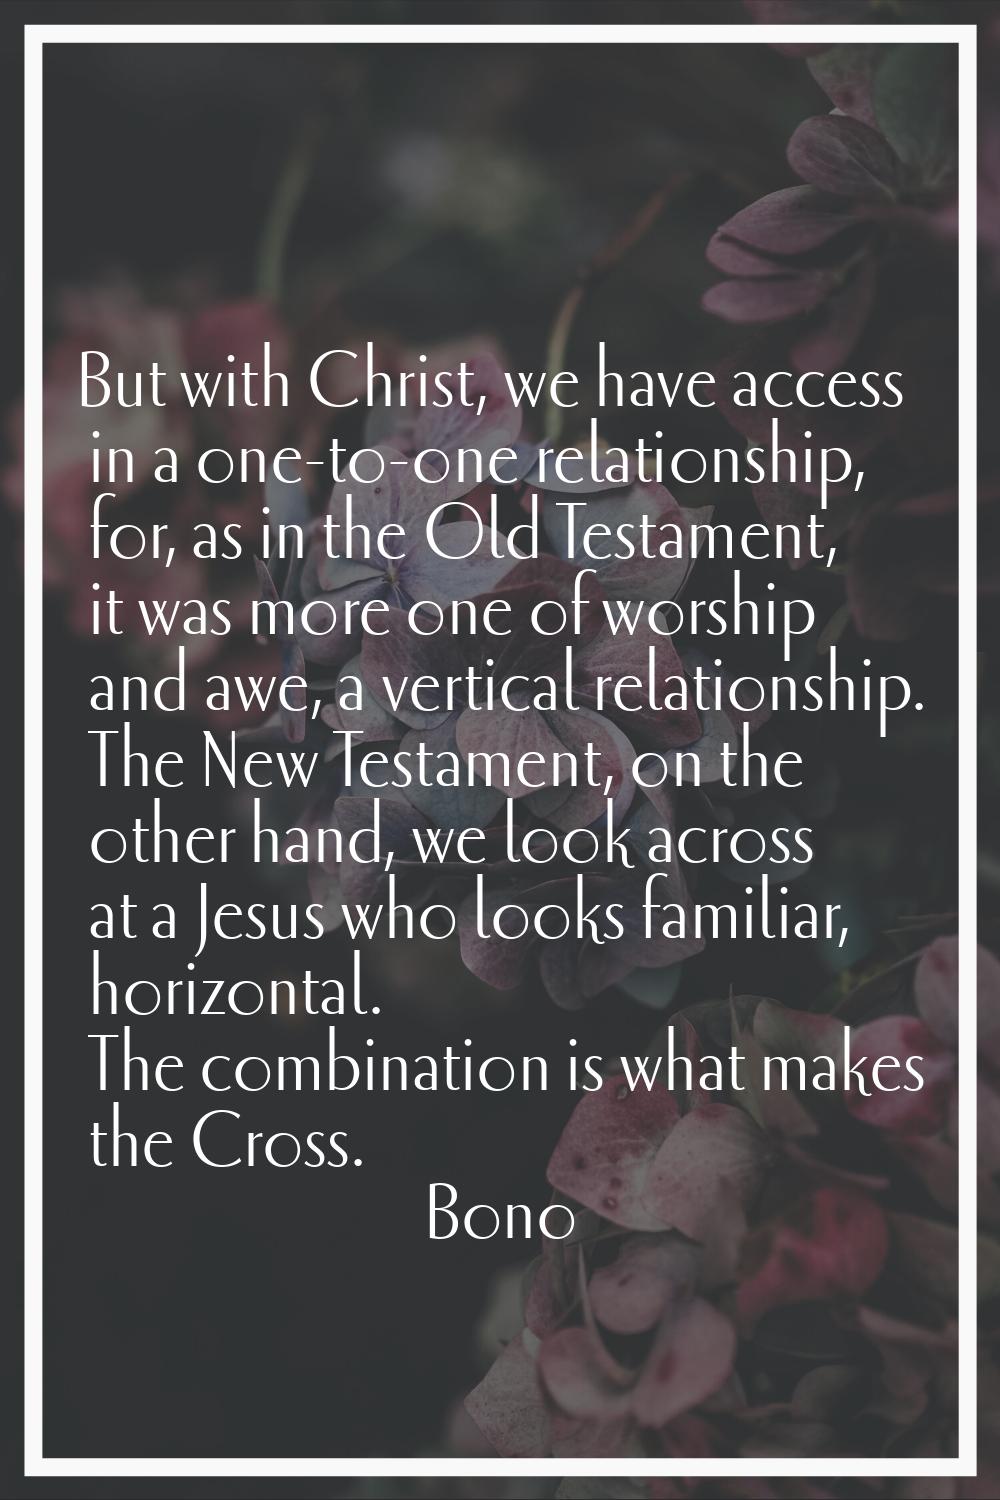 But with Christ, we have access in a one-to-one relationship, for, as in the Old Testament, it was 